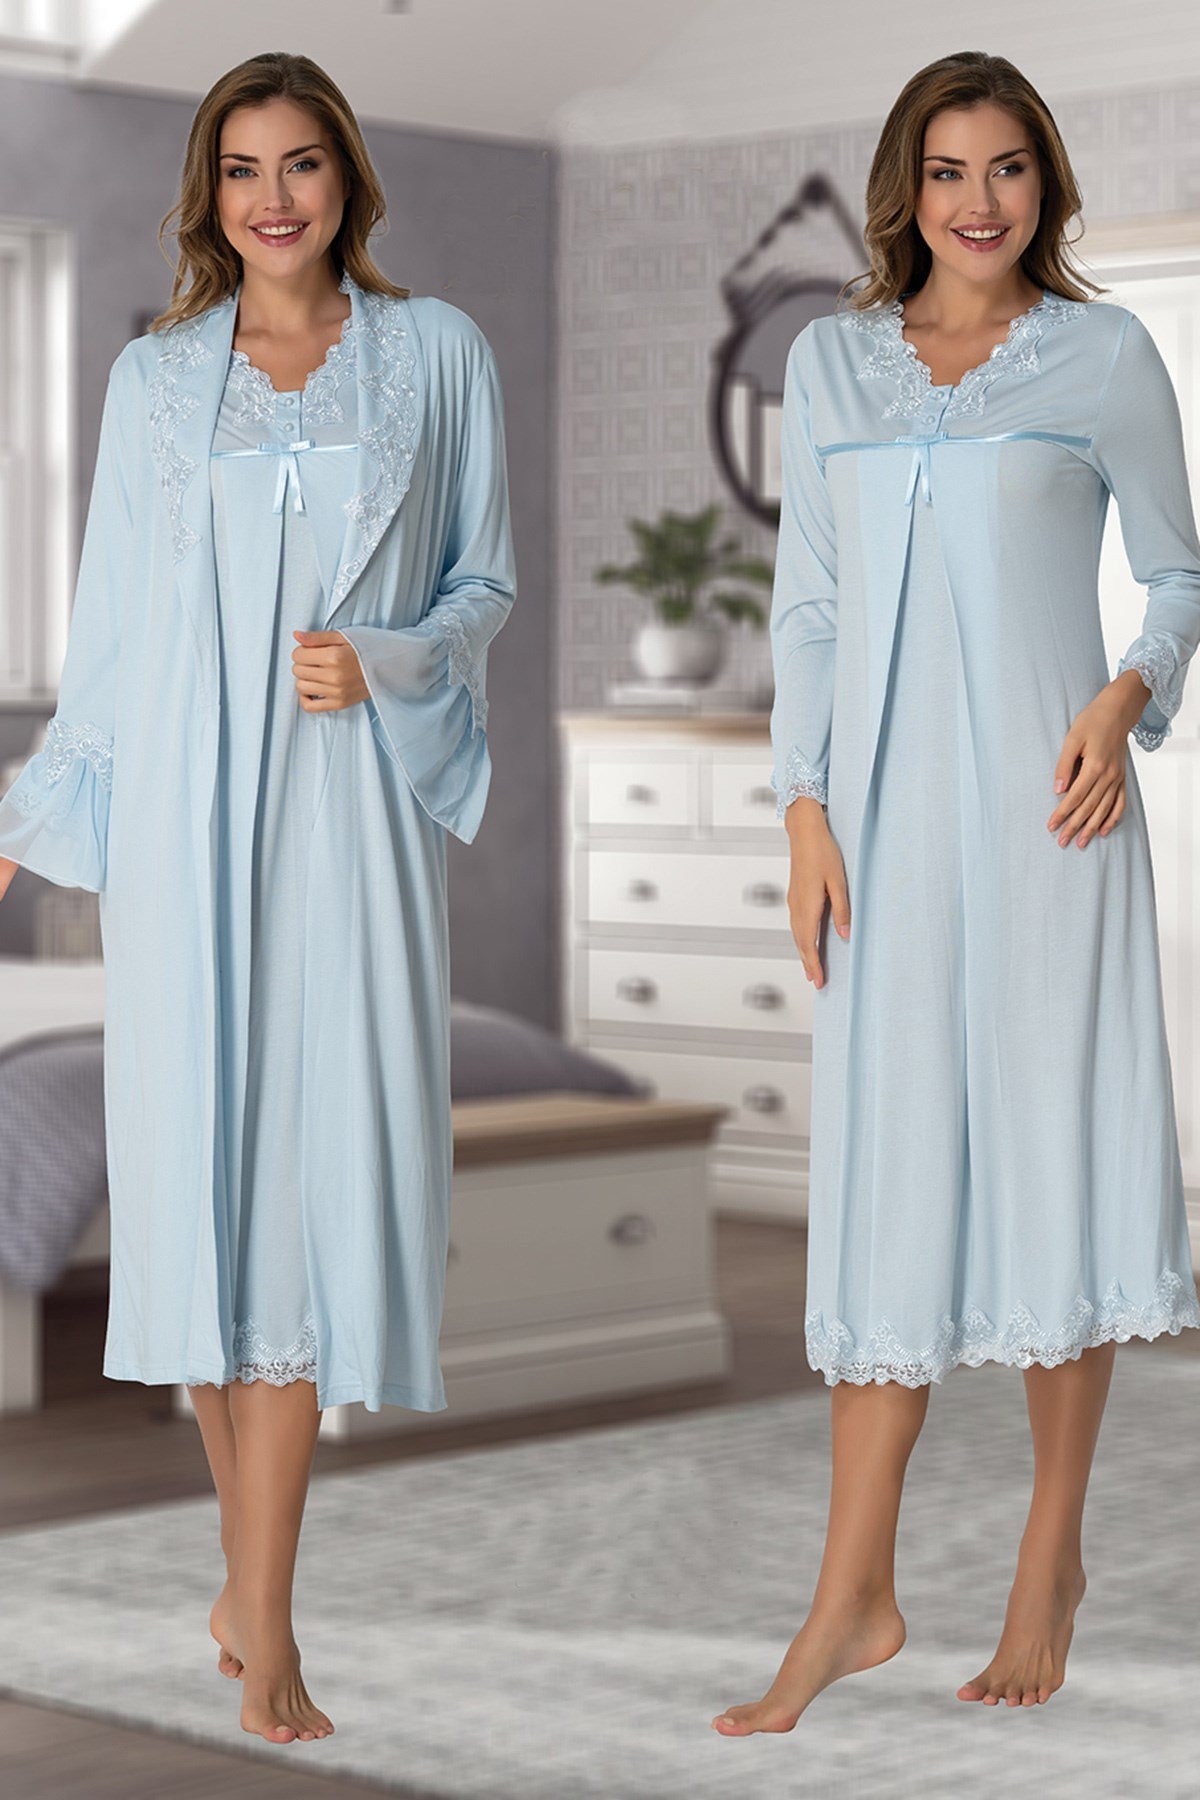 Effortt 7035 Baby Blue Lace Detailed Maternity Nightgown with Robe Set